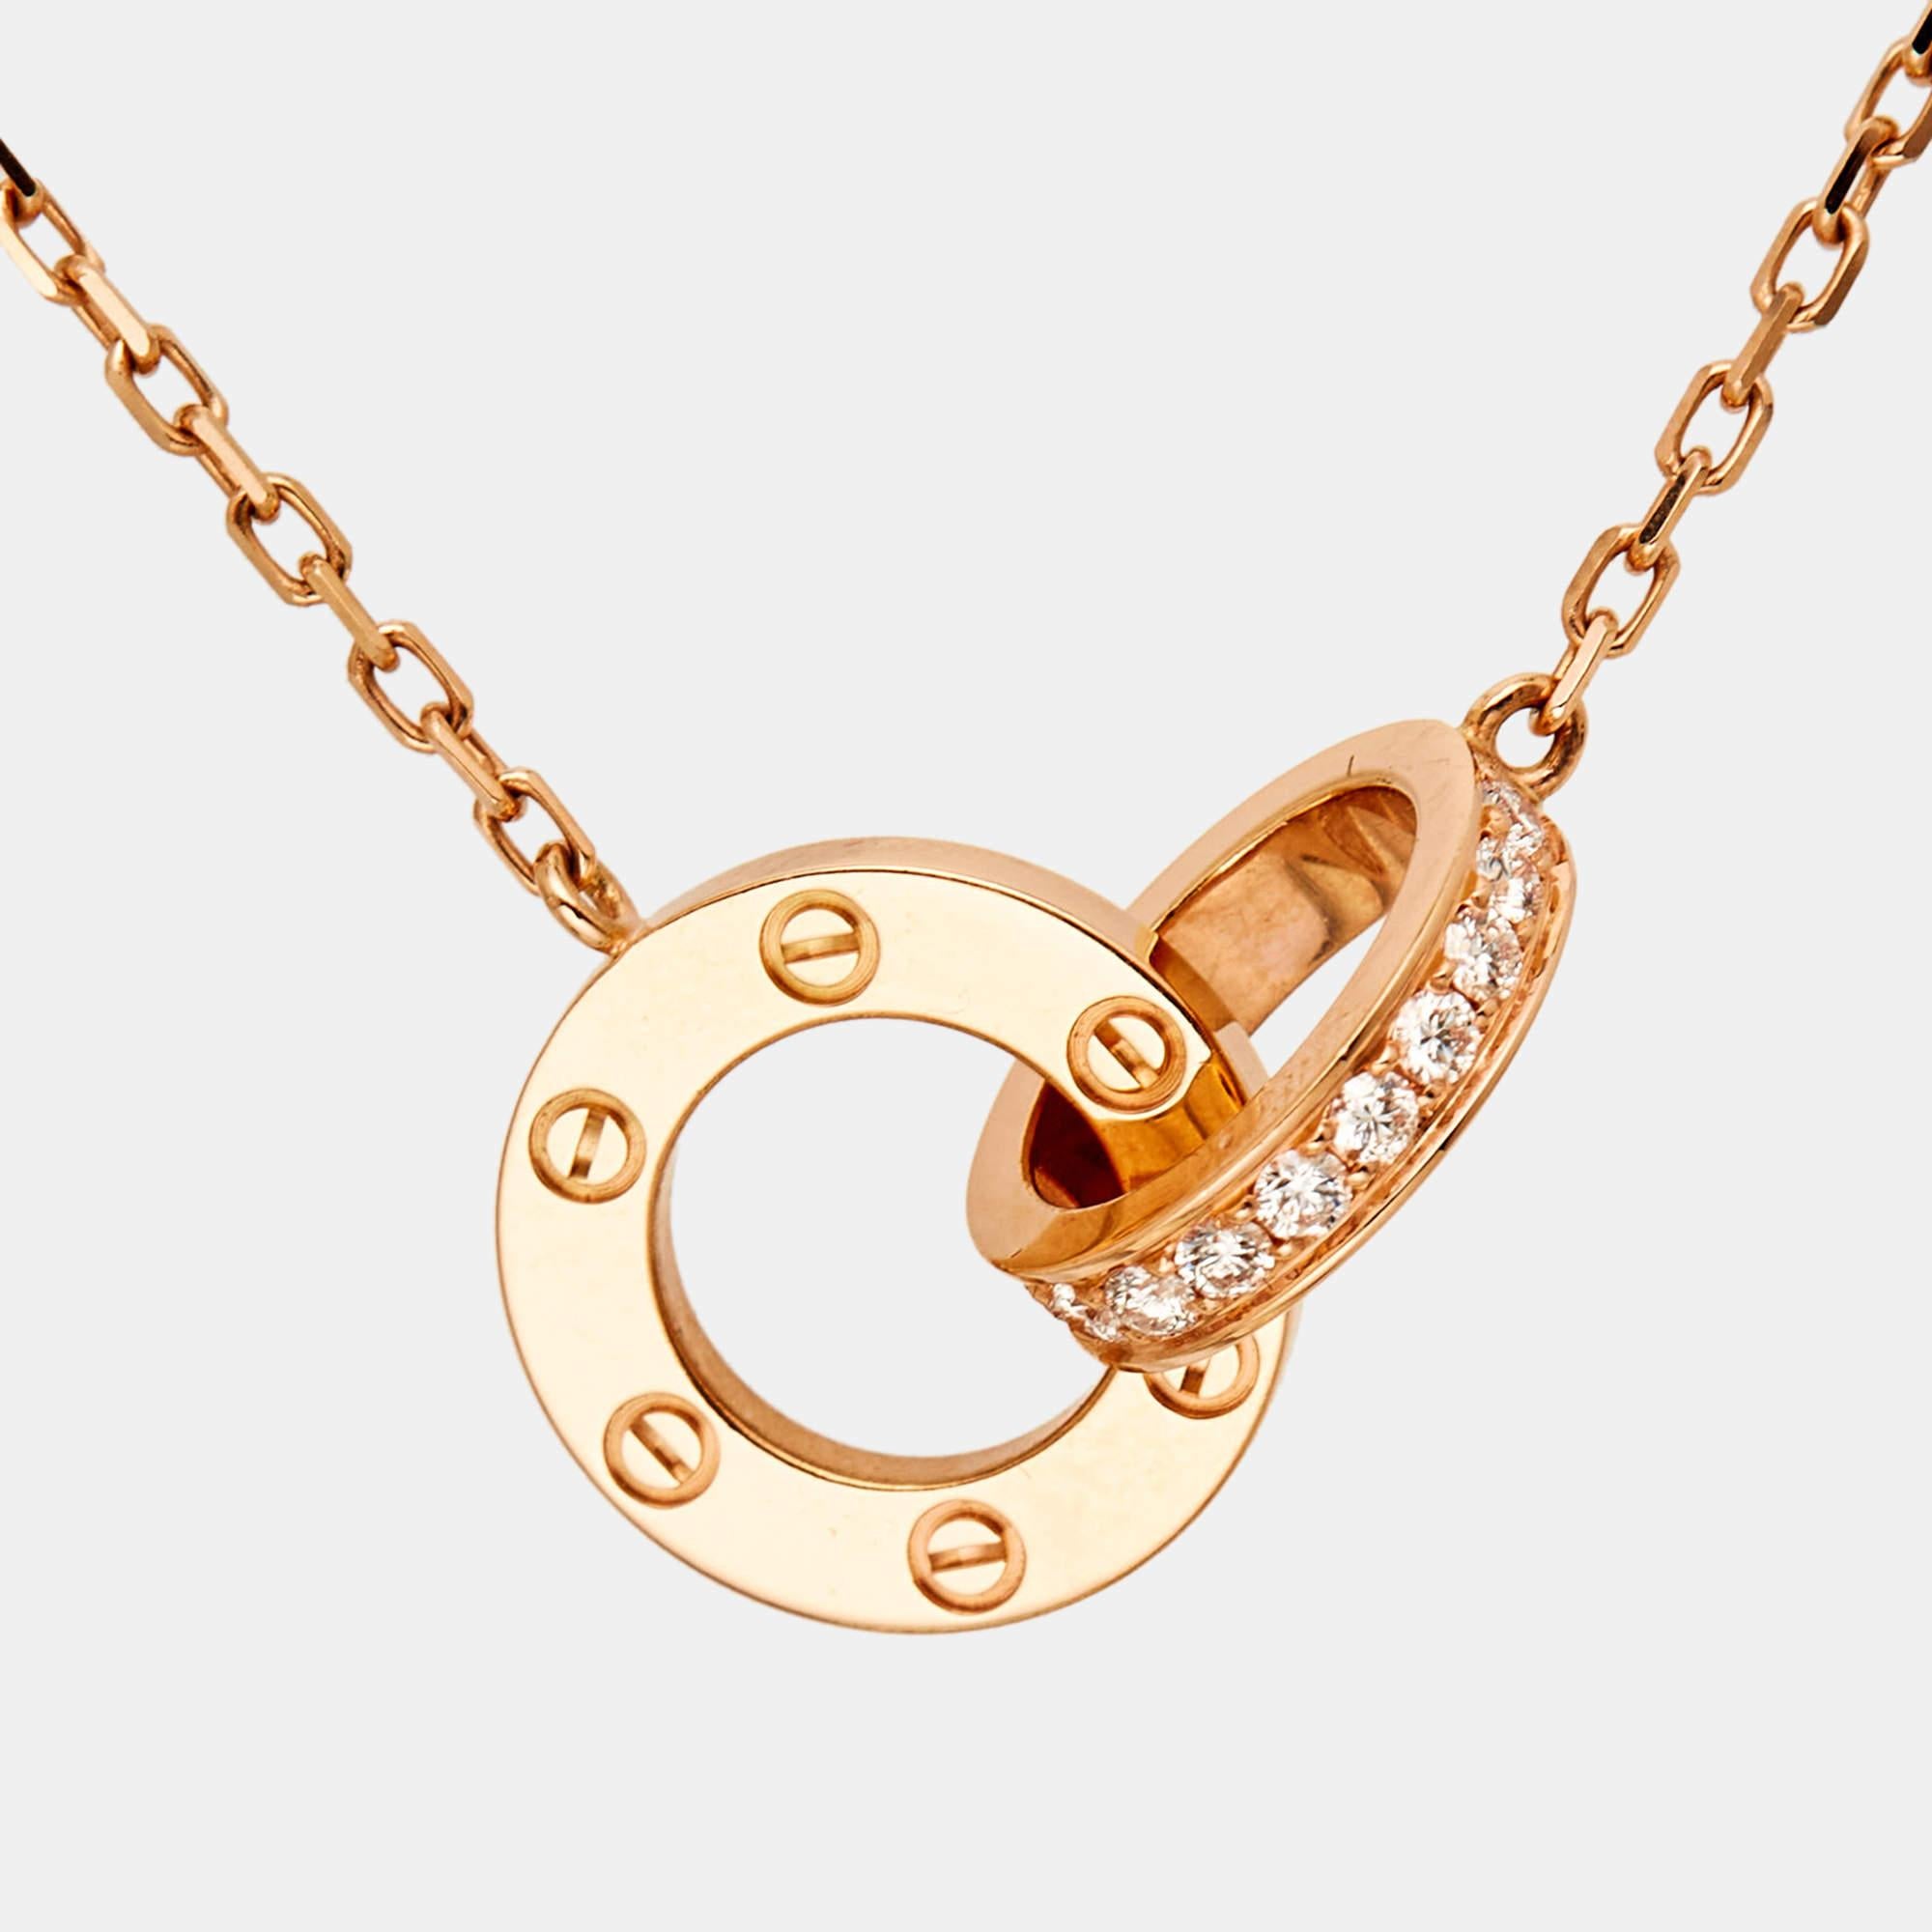 The Cartier Love necklace is an exquisite piece crafted in 18k rose gold. The design features interlocking loops adorned with dazzling diamonds, creating a luxurious and elegant aesthetic. This necklace seamlessly combines timeless style with modern